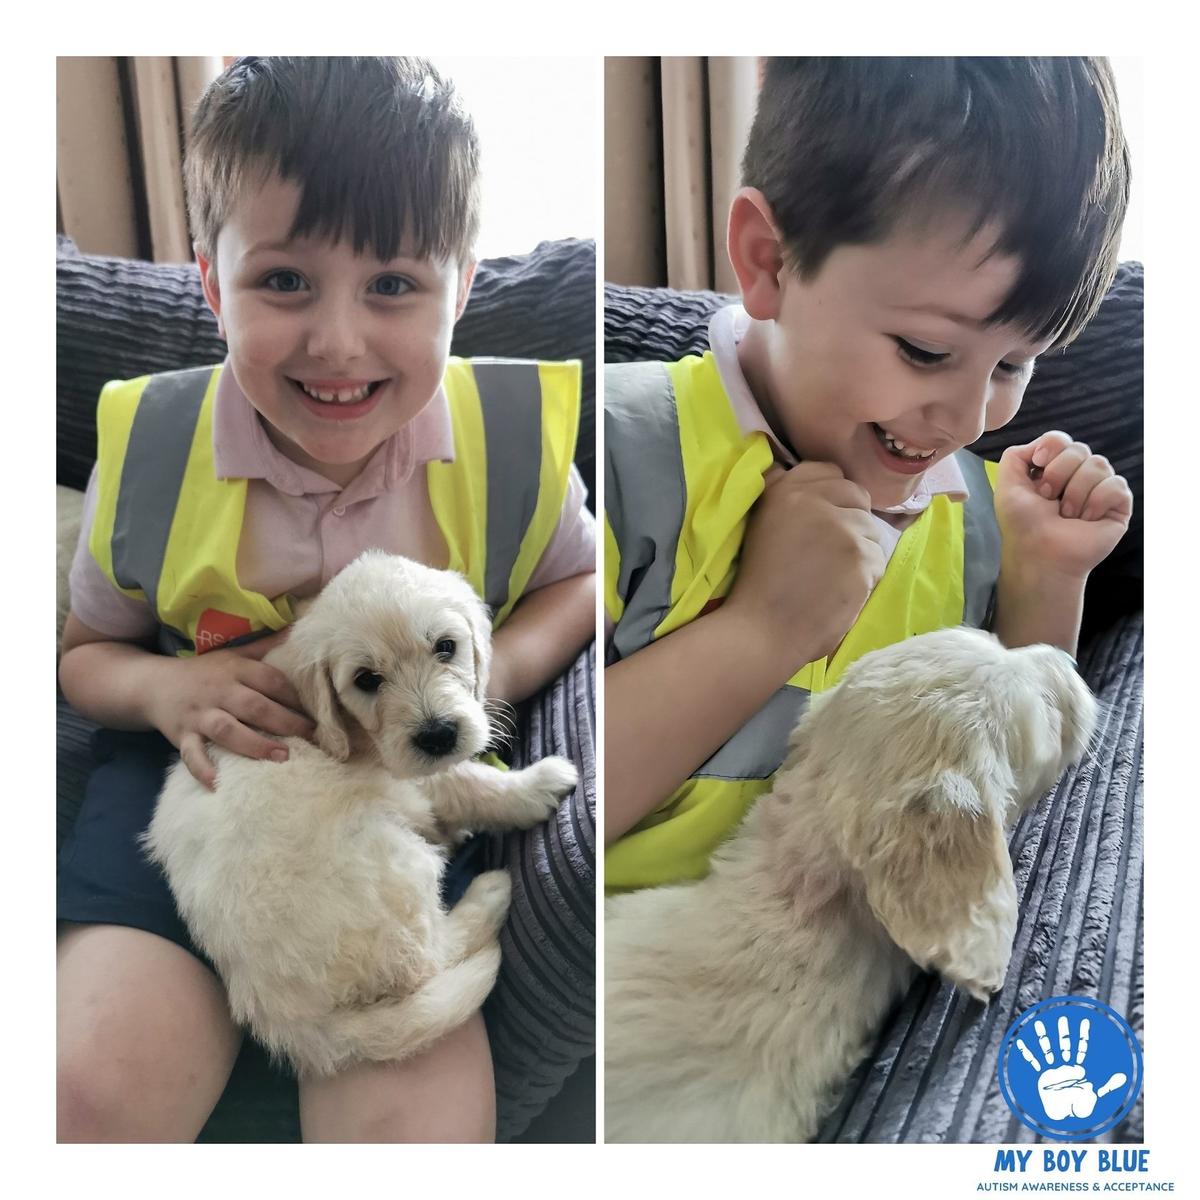 Riley holding My Canine Companion's autism service puppy in-training who was named after him. (Courtesy of <a href="https://www.facebook.com/myboyblue2017/">Nicole Duggan</a>)